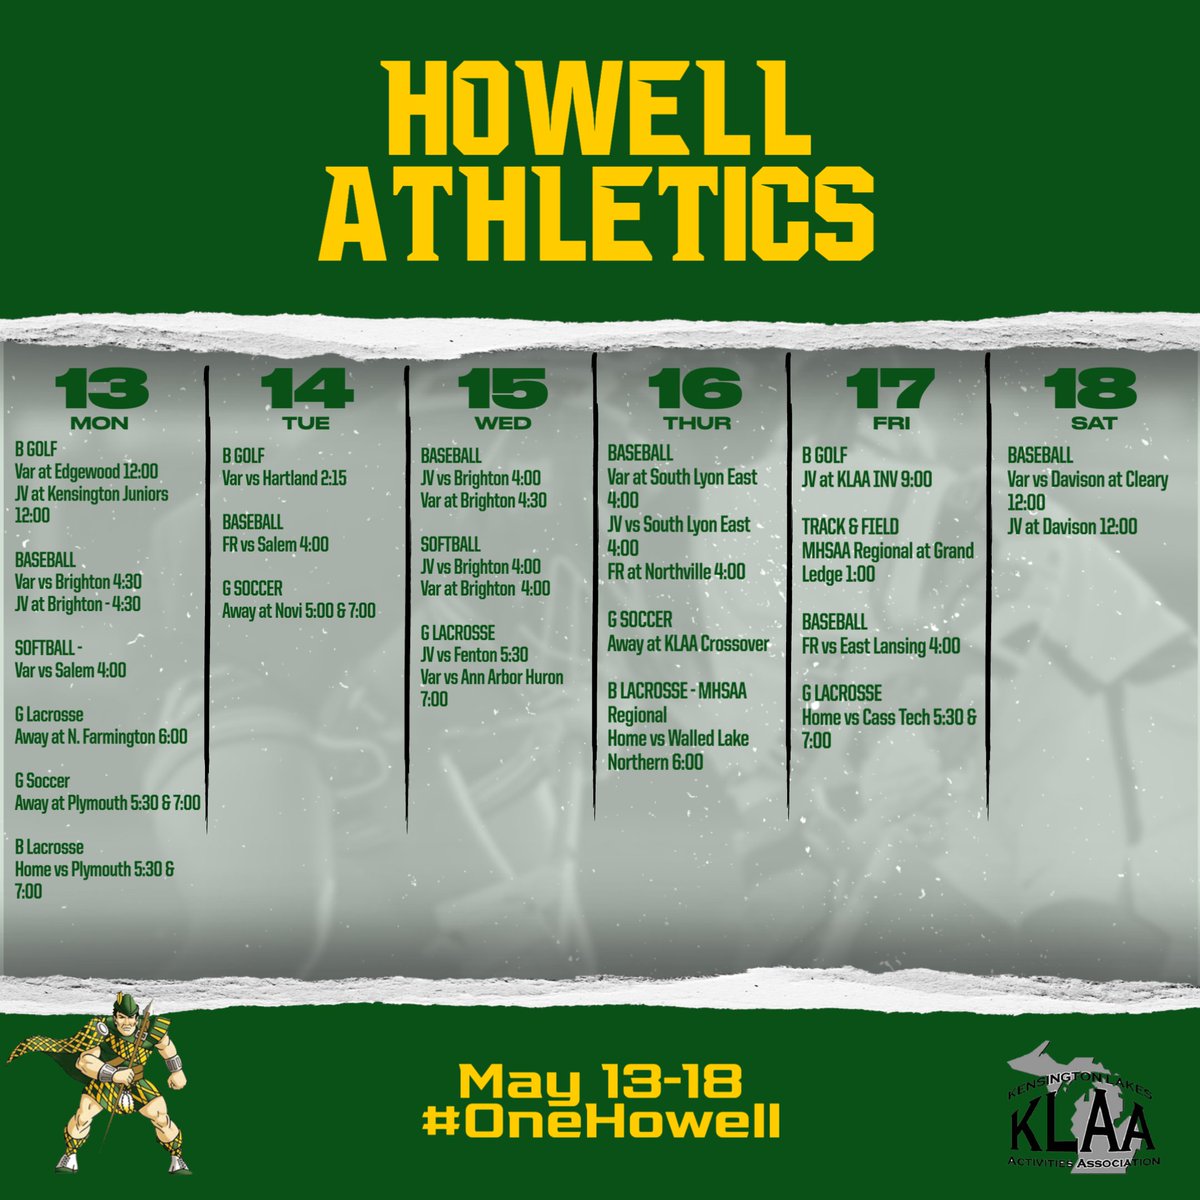 We are kicking off Championship Season this week...Boys Lacrosse and Track & Field have Regionals this week. Good Luck! #OneHowell